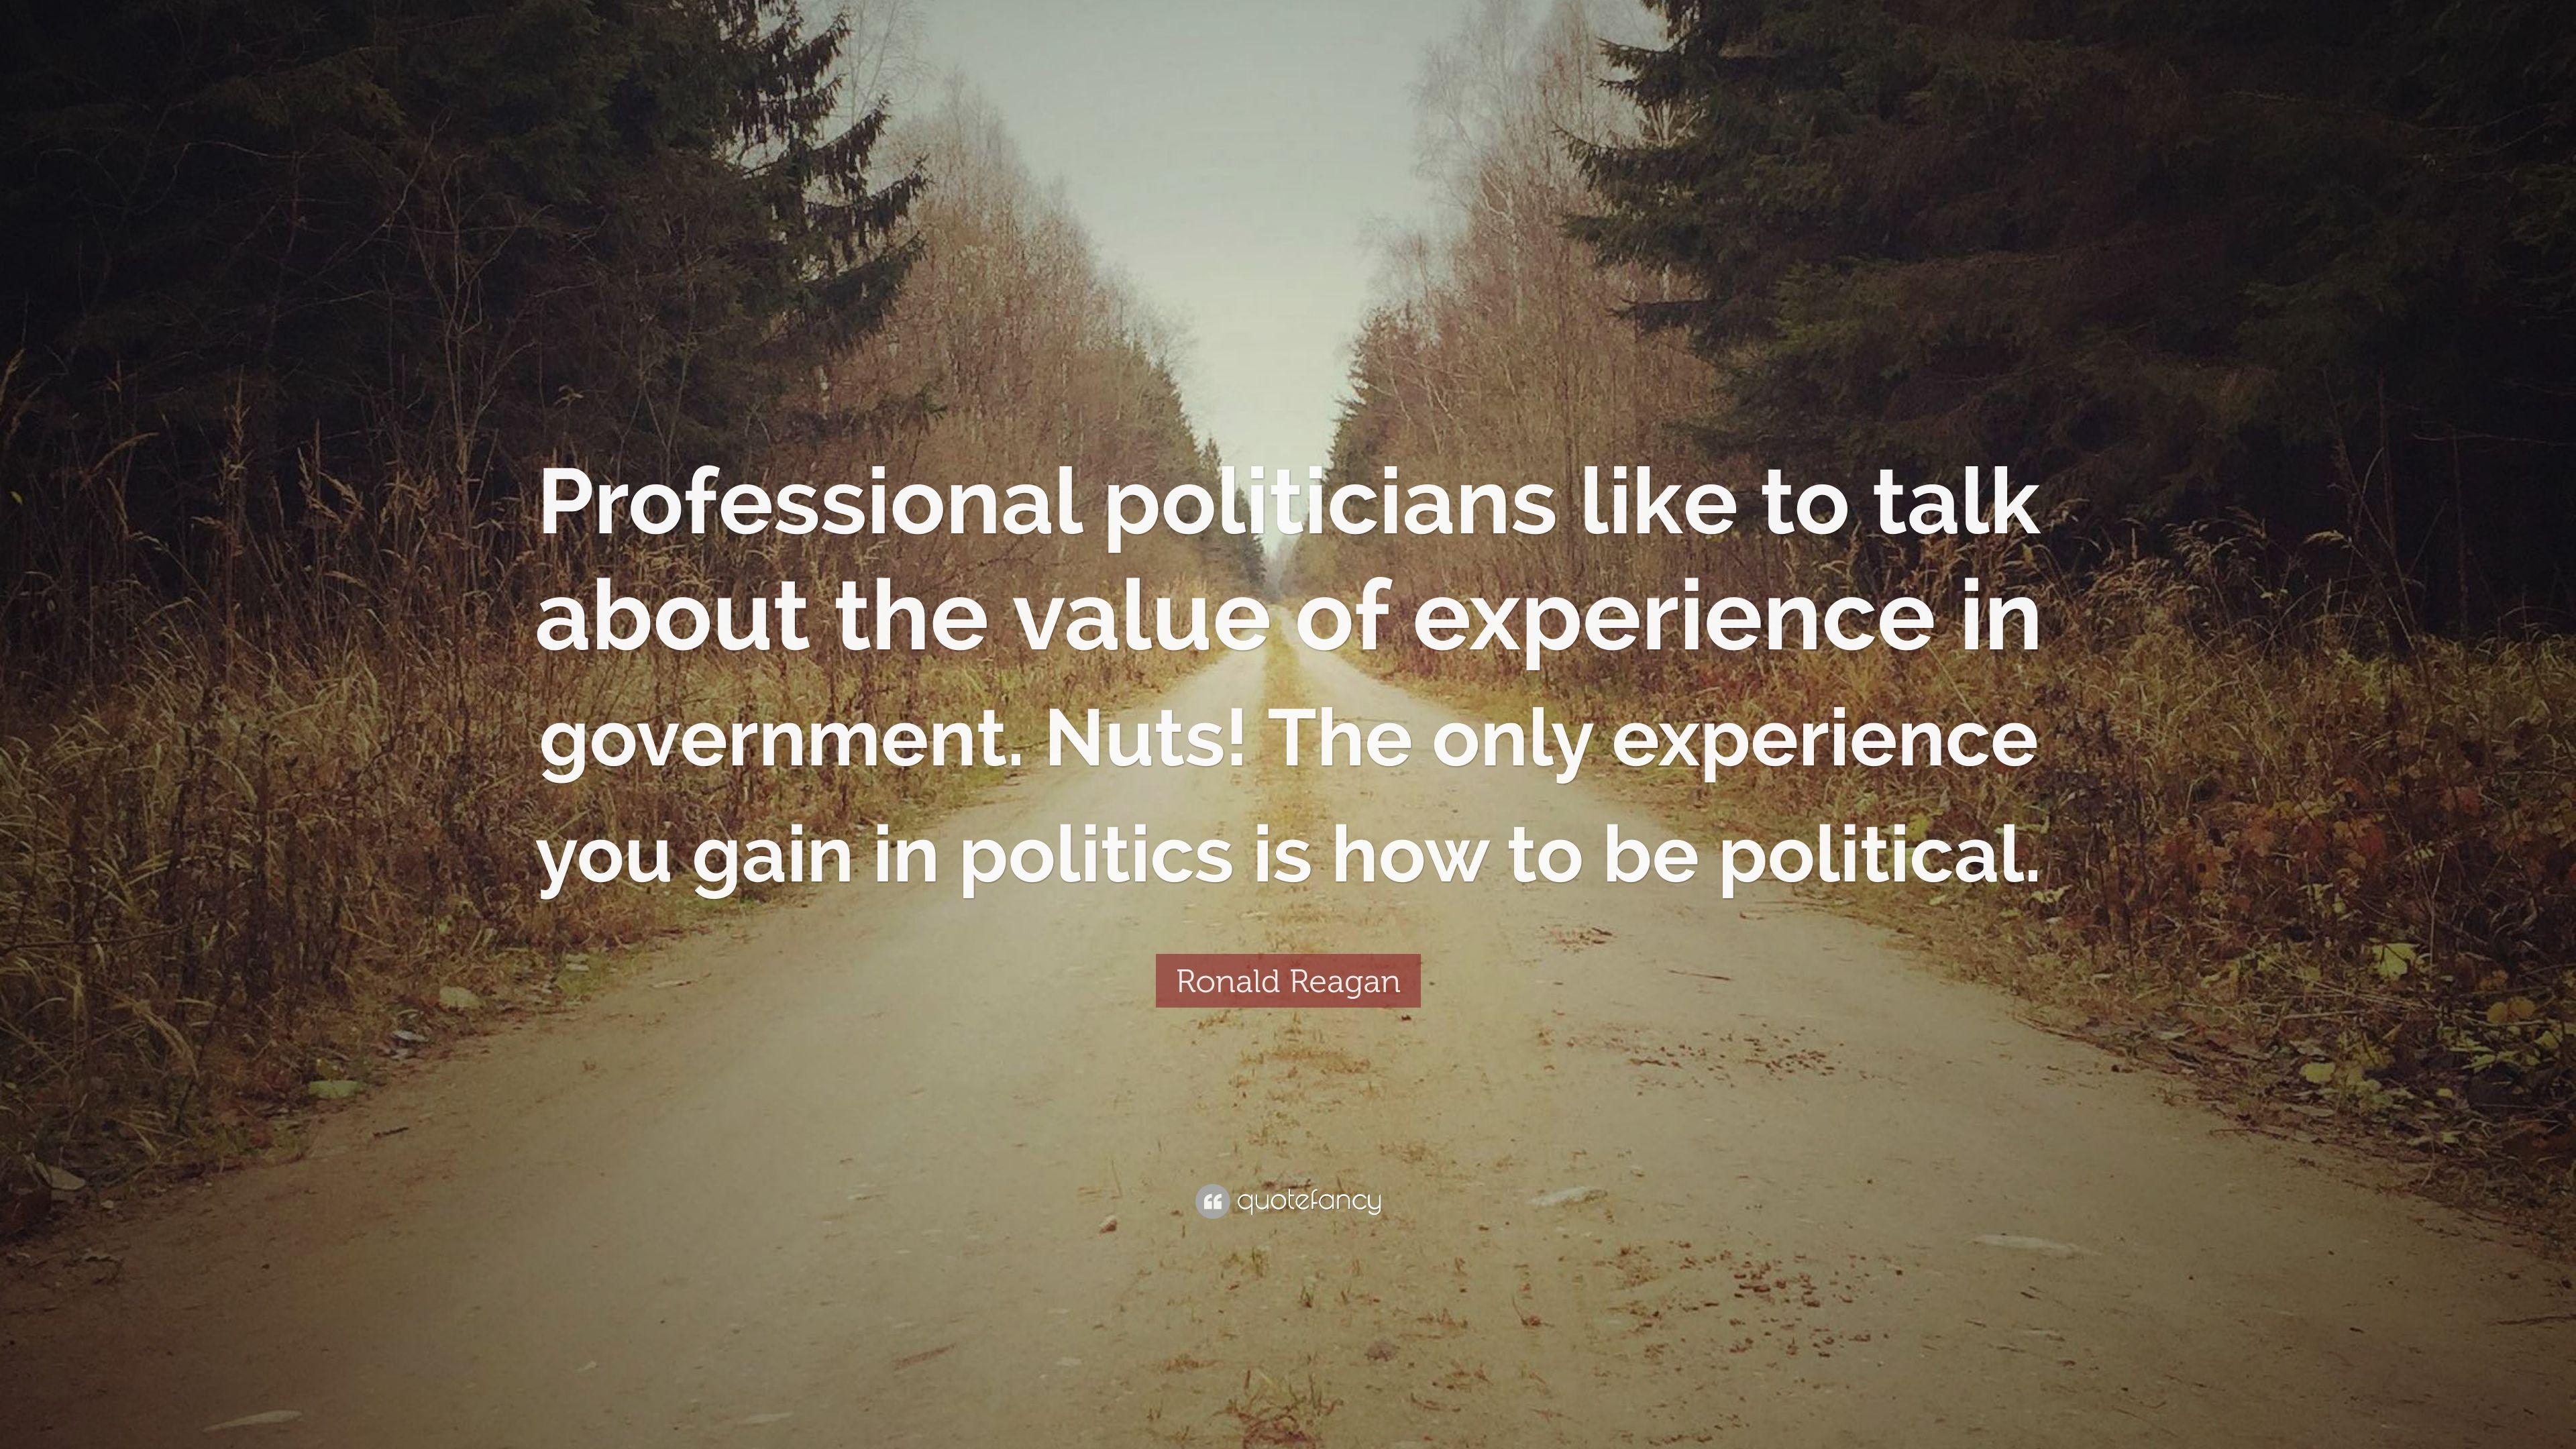 Ronald Reagan Quote: “Professional politicians like to talk about